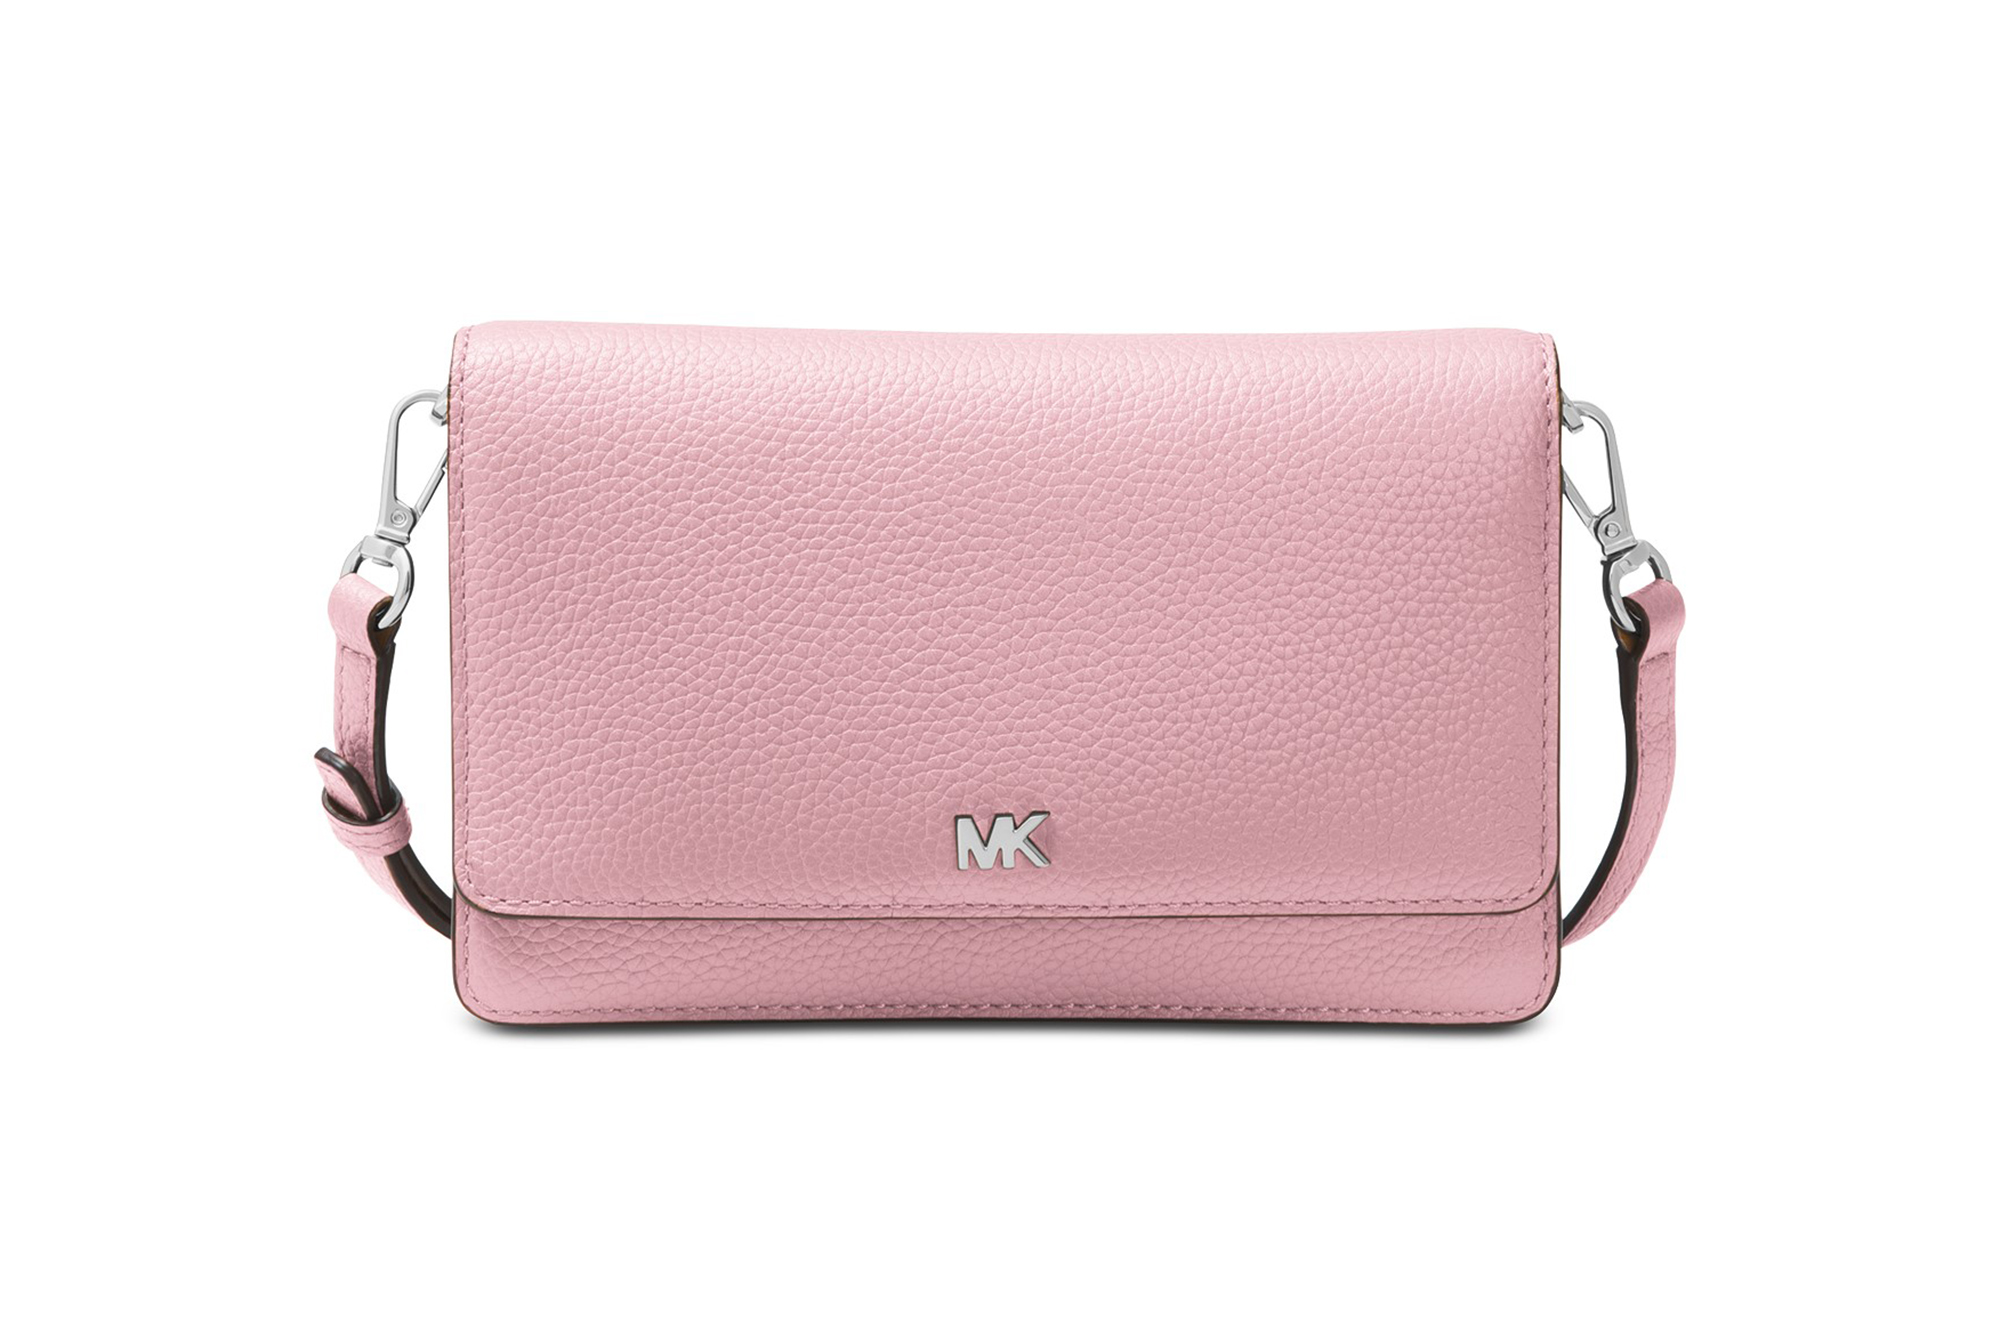 This Michael Kors Crossbody Is Only $50 